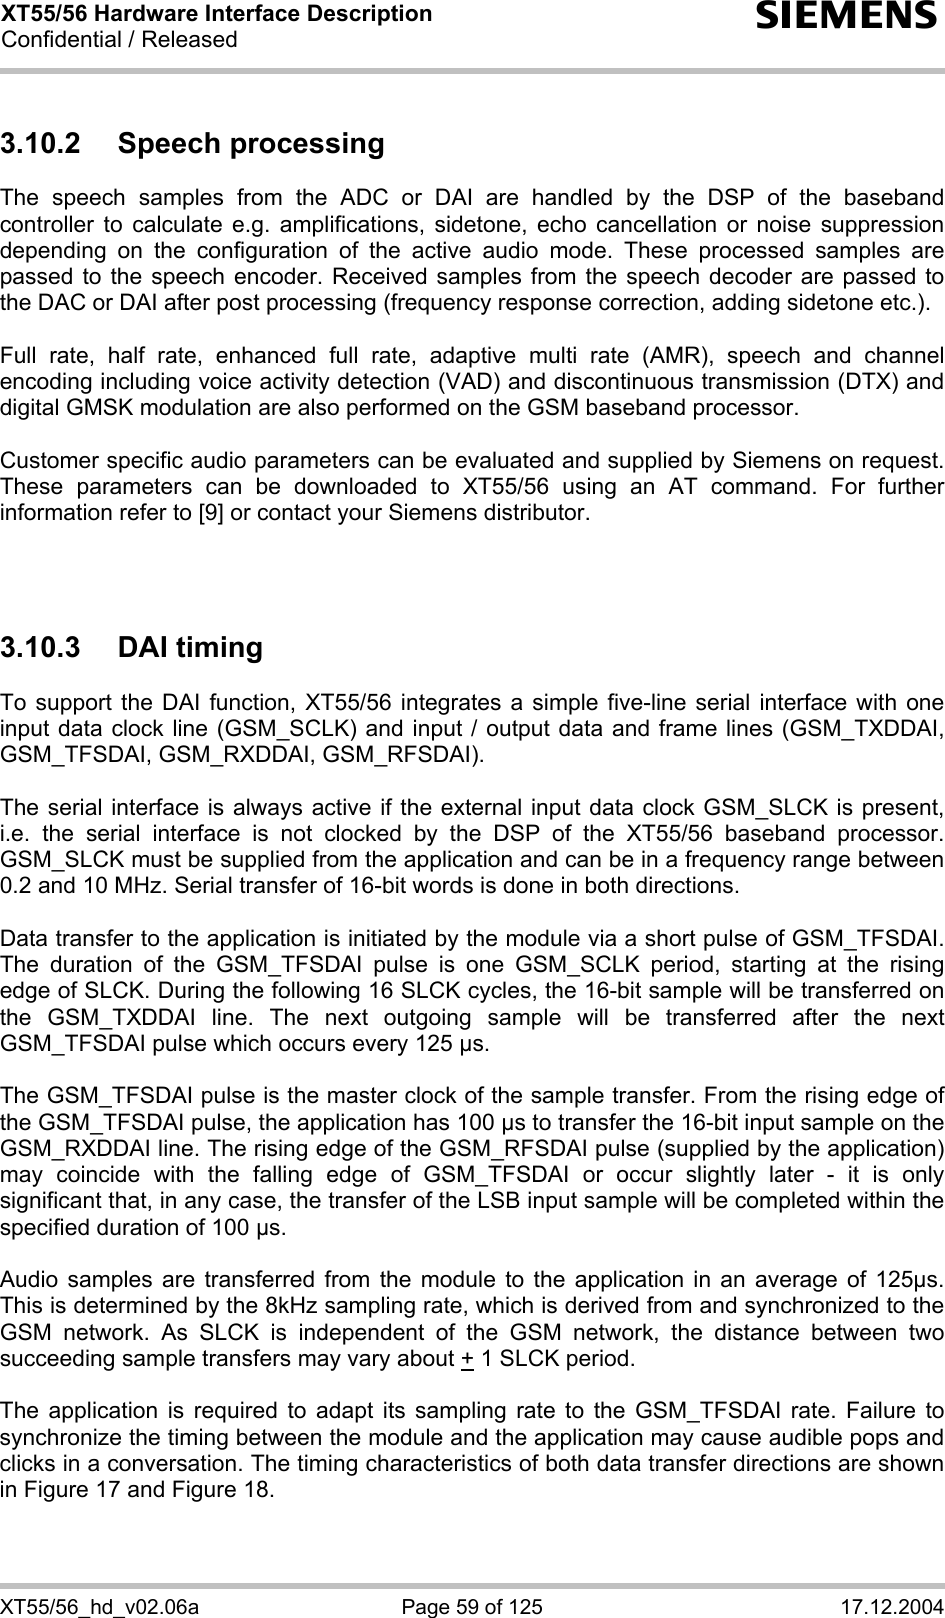 XT55/56 Hardware Interface Description Confidential / Released s XT55/56_hd_v02.06a  Page 59 of 125  17.12.2004 3.10.2 Speech processing The speech samples from the ADC or DAI are handled by the DSP of the baseband controller to calculate e.g. amplifications, sidetone, echo cancellation or noise suppression depending on the configuration of the active audio mode. These processed samples are passed to the speech encoder. Received samples from the speech decoder are passed to the DAC or DAI after post processing (frequency response correction, adding sidetone etc.).  Full rate, half rate, enhanced full rate, adaptive multi rate (AMR), speech and channel encoding including voice activity detection (VAD) and discontinuous transmission (DTX) and digital GMSK modulation are also performed on the GSM baseband processor.  Customer specific audio parameters can be evaluated and supplied by Siemens on request. These parameters can be downloaded to XT55/56 using an AT command. For further information refer to [9] or contact your Siemens distributor.    3.10.3 DAI timing To support the DAI function, XT55/56 integrates a simple five-line serial interface with one input data clock line (GSM_SCLK) and input / output data and frame lines (GSM_TXDDAI, GSM_TFSDAI, GSM_RXDDAI, GSM_RFSDAI).   The serial interface is always active if the external input data clock GSM_SLCK is present, i.e. the serial interface is not clocked by the DSP of the XT55/56 baseband processor. GSM_SLCK must be supplied from the application and can be in a frequency range between 0.2 and 10 MHz. Serial transfer of 16-bit words is done in both directions.   Data transfer to the application is initiated by the module via a short pulse of GSM_TFSDAI. The duration of the GSM_TFSDAI pulse is one GSM_SCLK period, starting at the rising edge of SLCK. During the following 16 SLCK cycles, the 16-bit sample will be transferred on the GSM_TXDDAI line. The next outgoing sample will be transferred after the next GSM_TFSDAI pulse which occurs every 125 µs.   The GSM_TFSDAI pulse is the master clock of the sample transfer. From the rising edge of the GSM_TFSDAI pulse, the application has 100 µs to transfer the 16-bit input sample on the GSM_RXDDAI line. The rising edge of the GSM_RFSDAI pulse (supplied by the application) may coincide with the falling edge of GSM_TFSDAI or occur slightly later - it is only significant that, in any case, the transfer of the LSB input sample will be completed within the specified duration of 100 µs.   Audio samples are transferred from the module to the application in an average of 125µs. This is determined by the 8kHz sampling rate, which is derived from and synchronized to the GSM network. As SLCK is independent of the GSM network, the distance between two succeeding sample transfers may vary about + 1 SLCK period.  The application is required to adapt its sampling rate to the GSM_TFSDAI rate. Failure to synchronize the timing between the module and the application may cause audible pops and clicks in a conversation. The timing characteristics of both data transfer directions are shown in Figure 17 and Figure 18.  